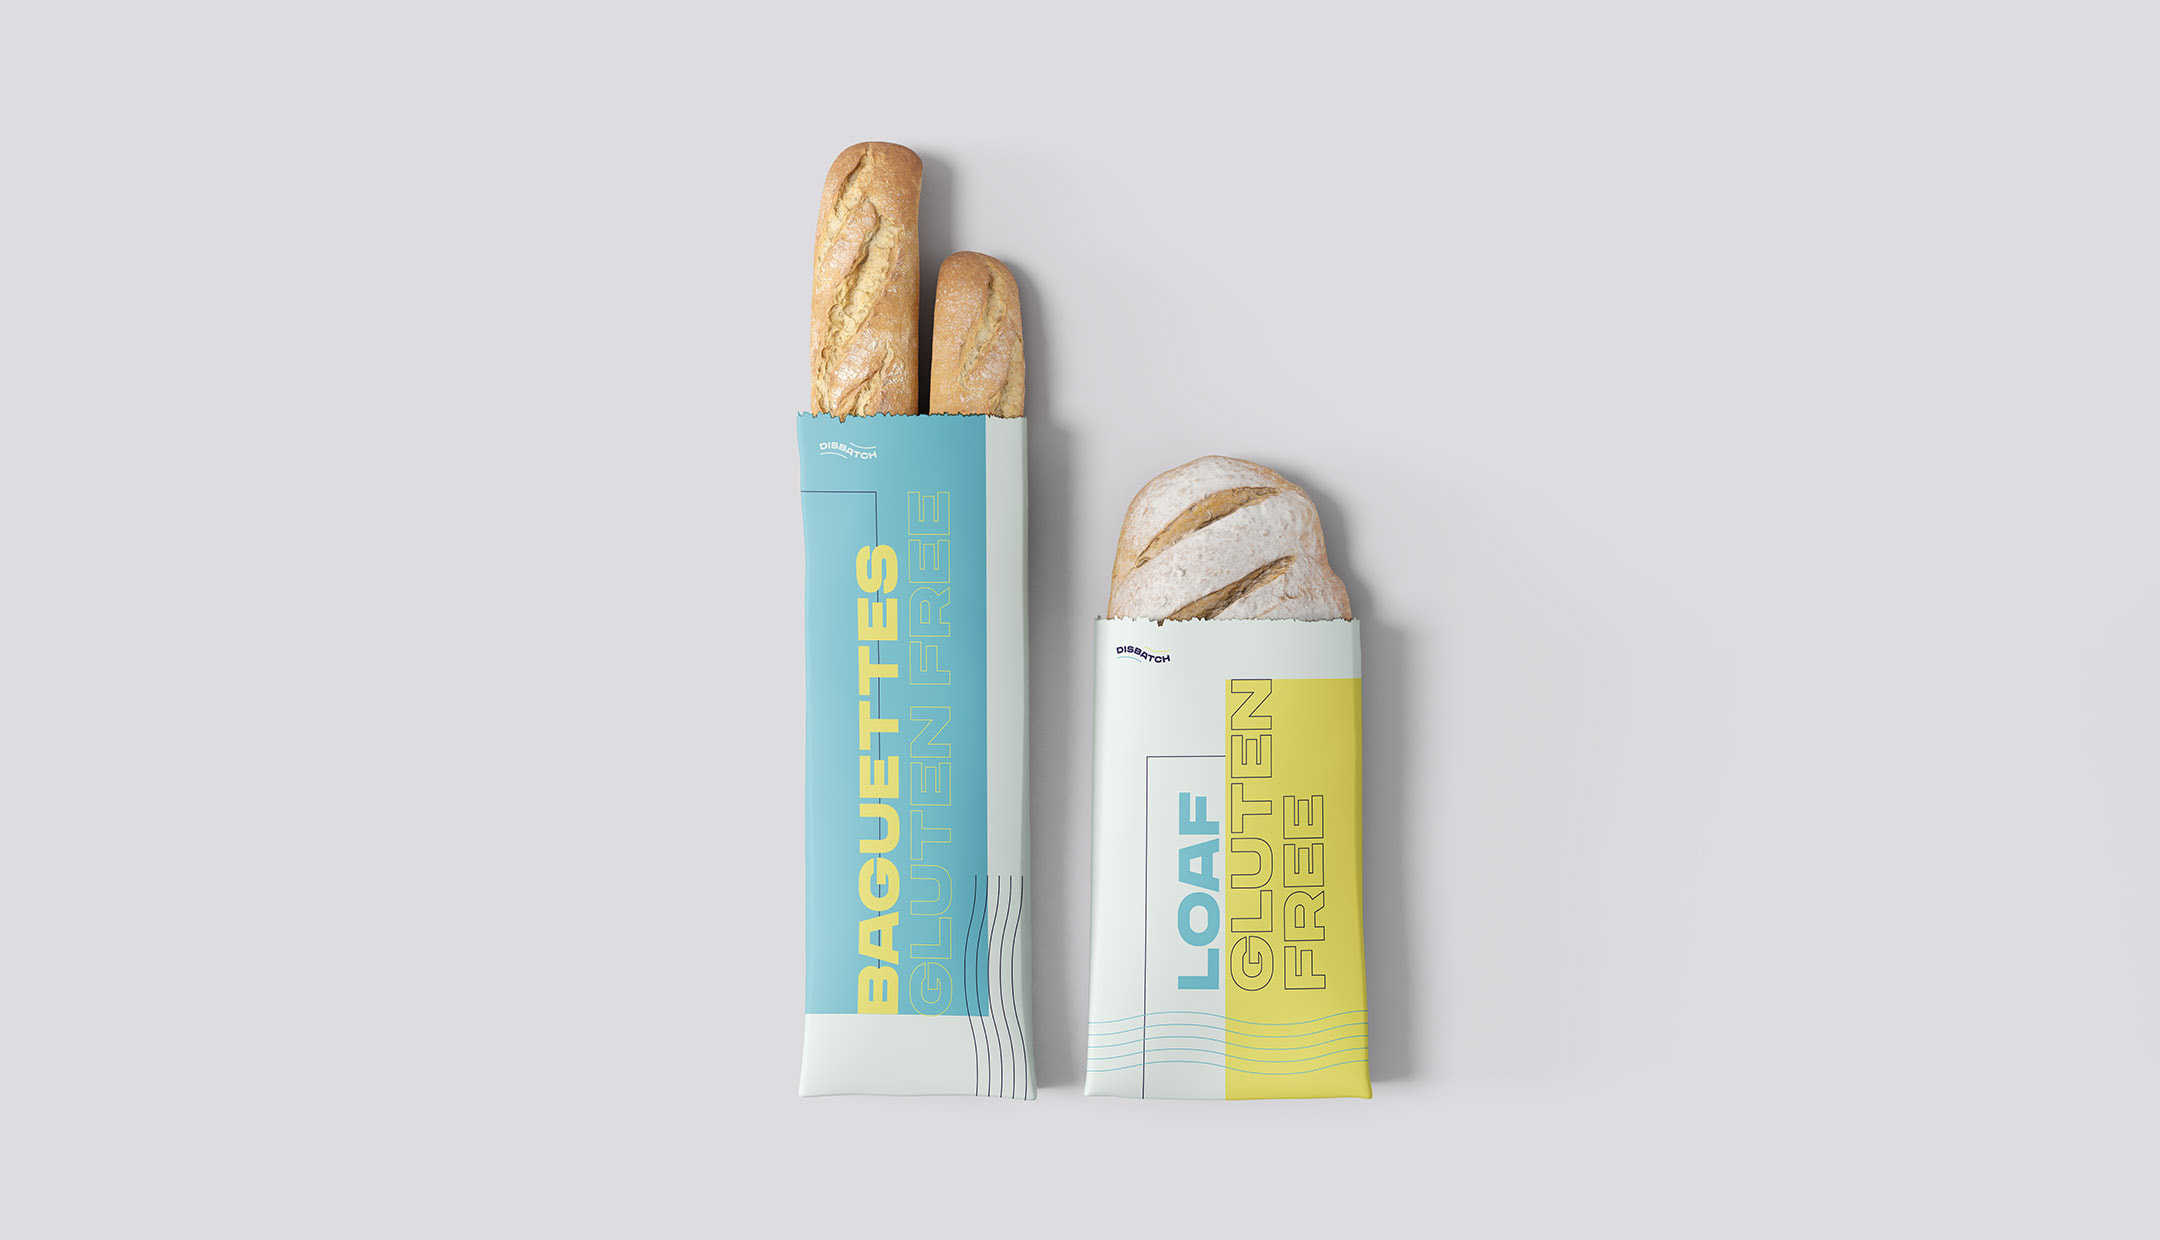 Disbatch packaging design for bread